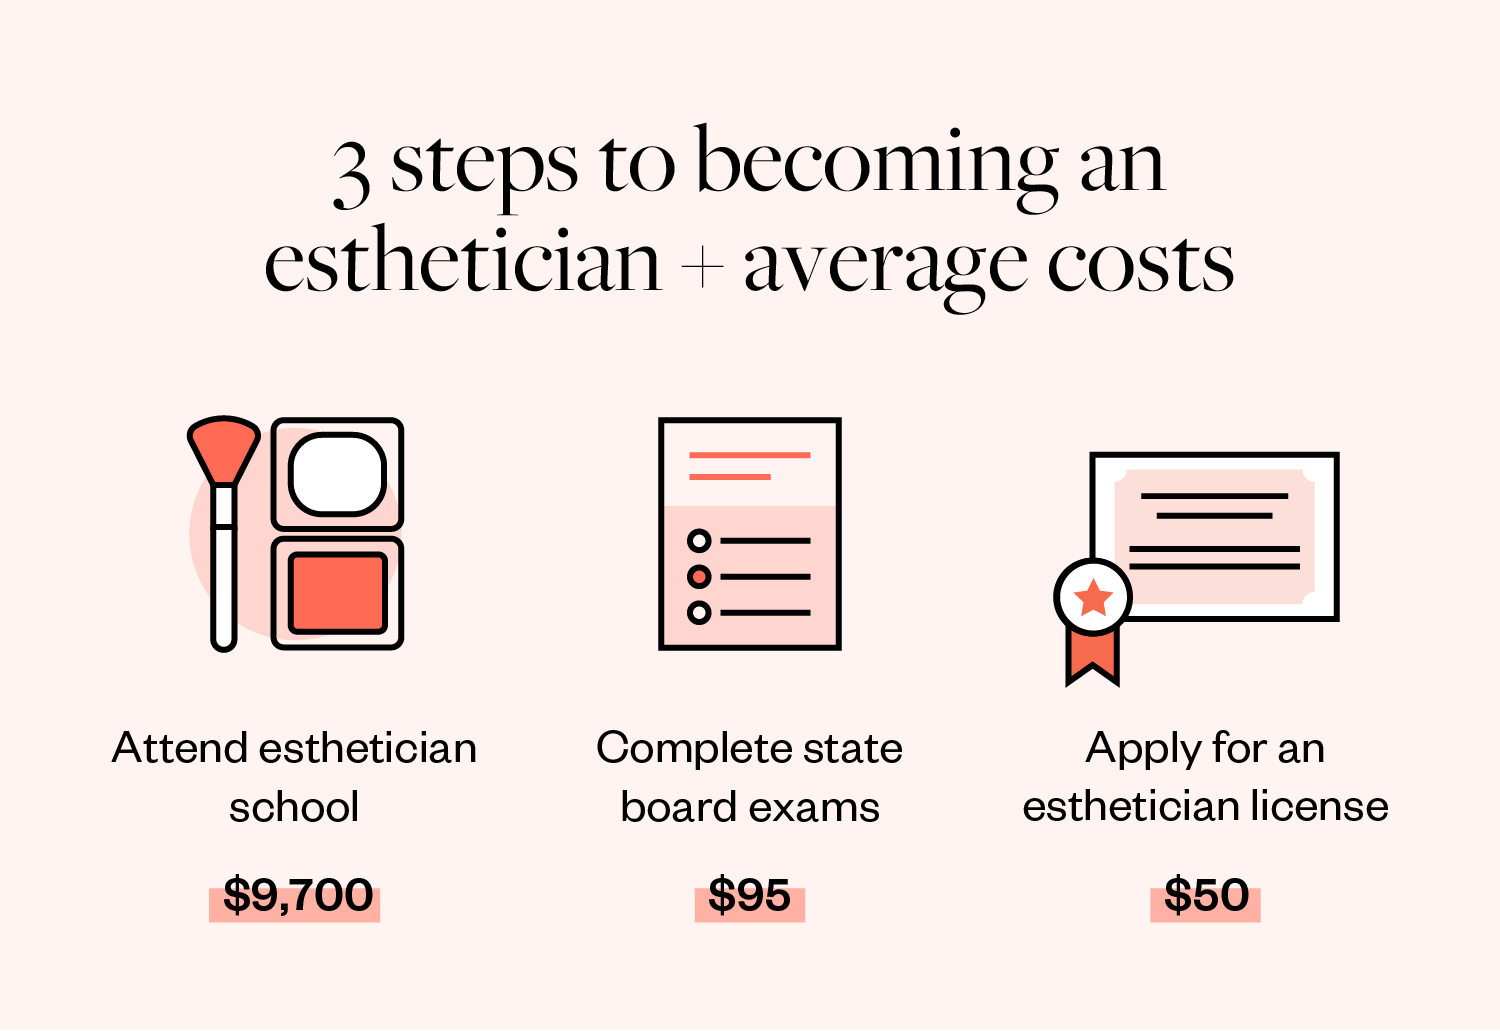 3 steps to becoming an esthetician and average costs